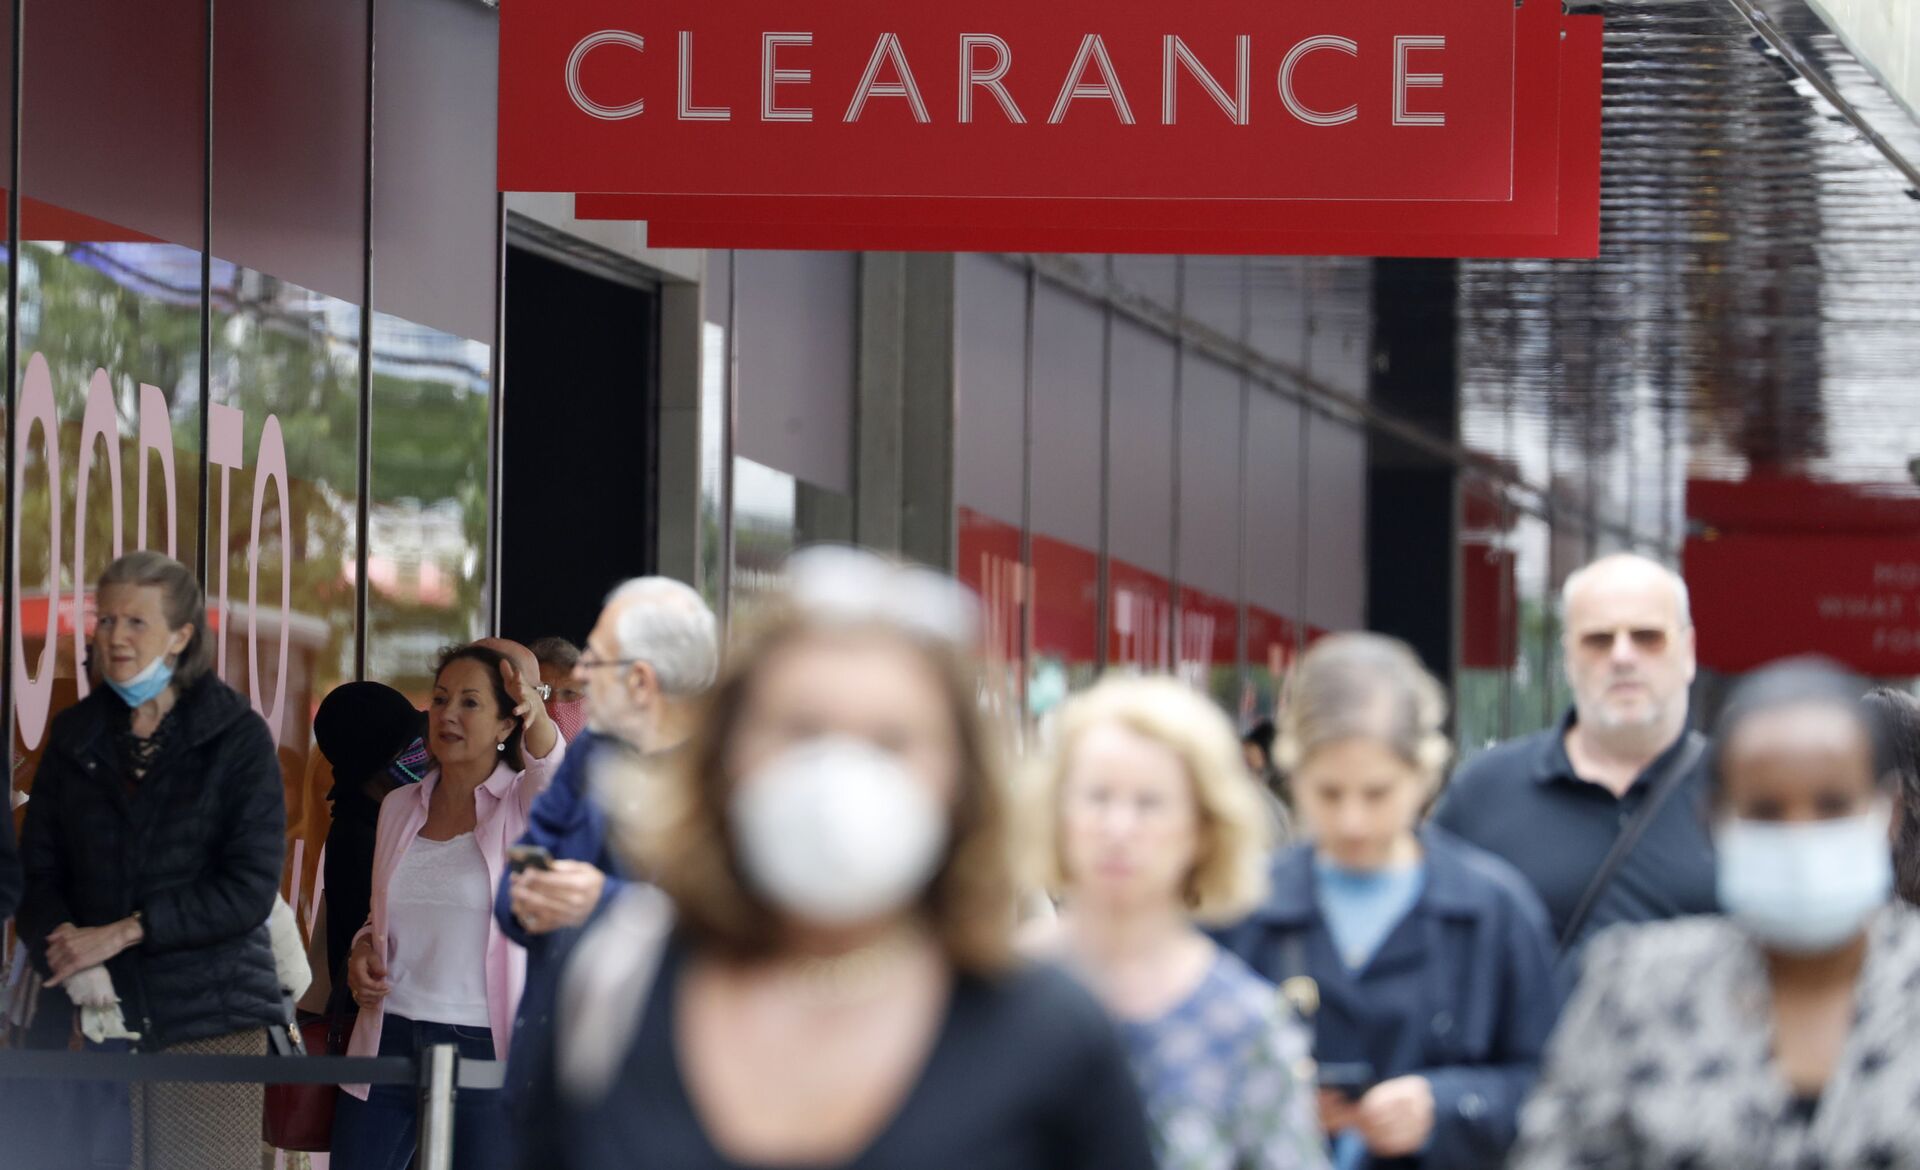 People, some wearing masks queue outside a John Lewis store, in London, Thursday, July 16, 2020. Unemployment across the U.K. has held steady during the coronavirus lockdown as a result of a government salary support scheme, but there are clear signals emerging that job losses will skyrocket over coming months - Sputnik International, 1920, 14.10.2021